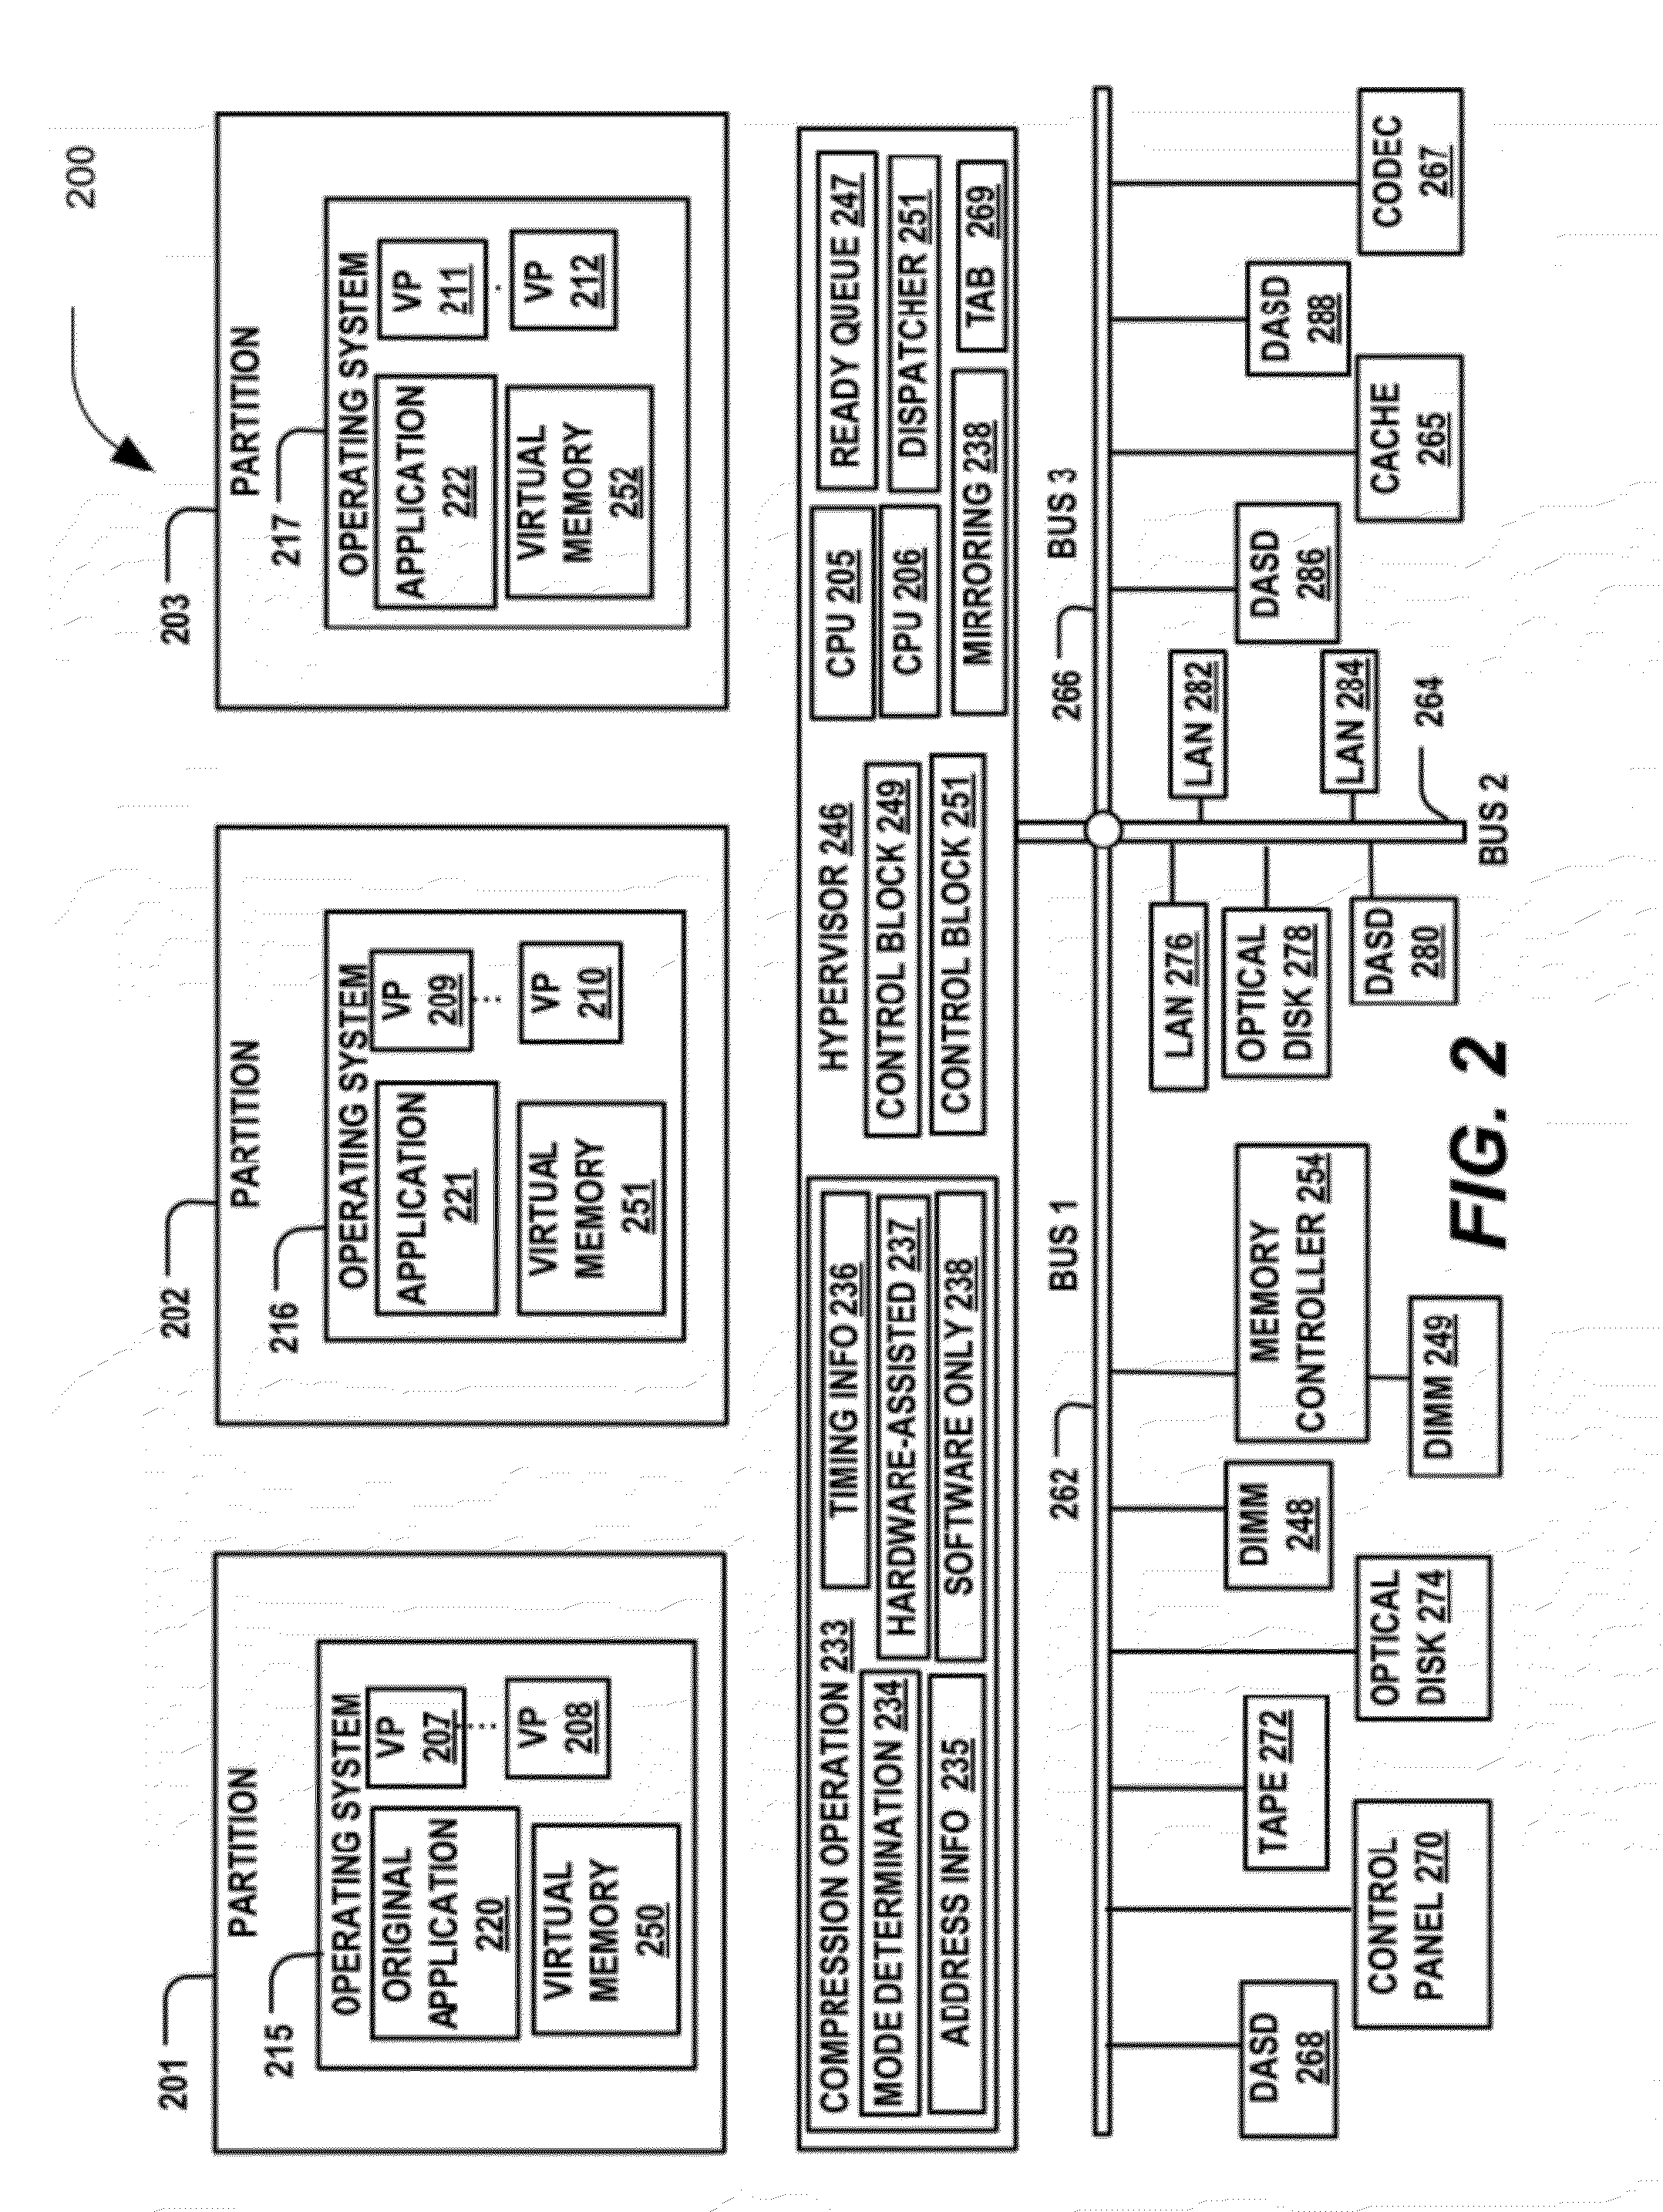 Memory management using both full hardware compression and hardware-assisted software compression